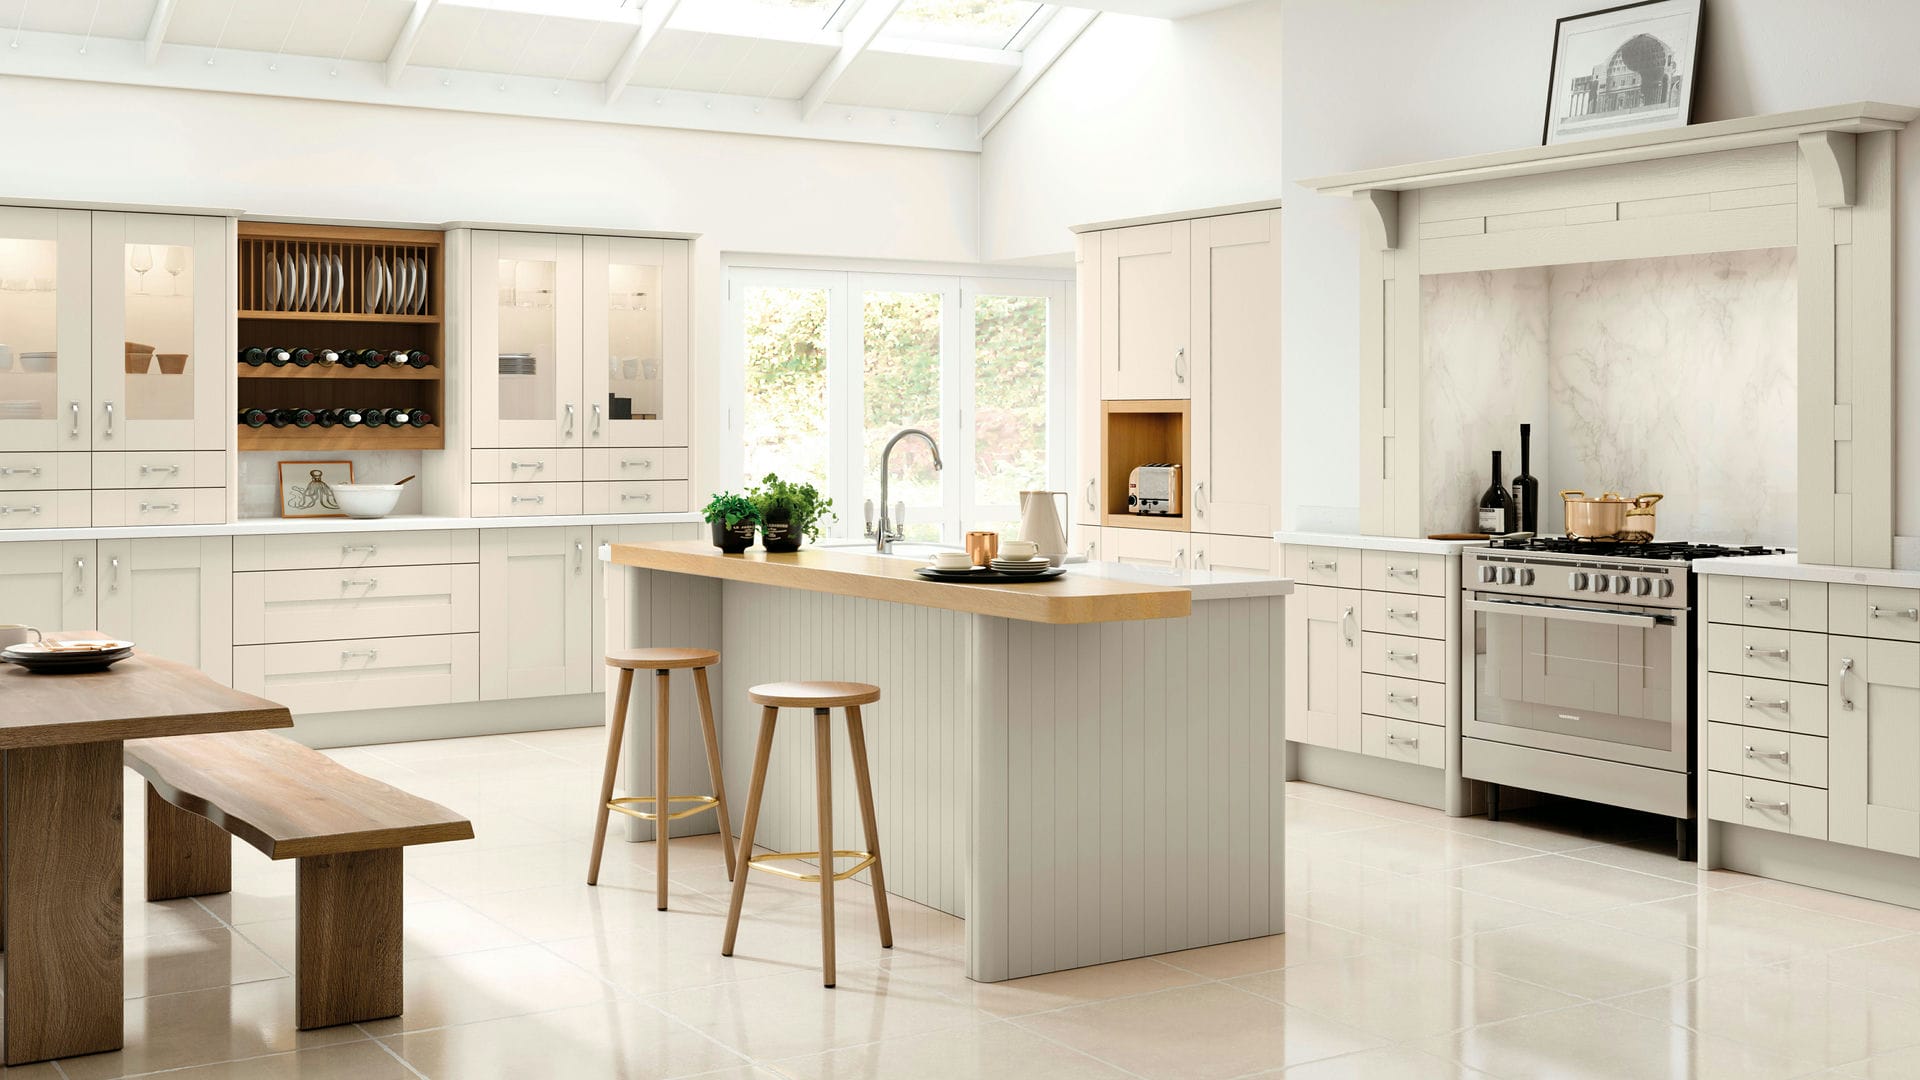 Luxury Shaker Cashmere kitchen offering a blend of classic design with the warmth of cashmere tones